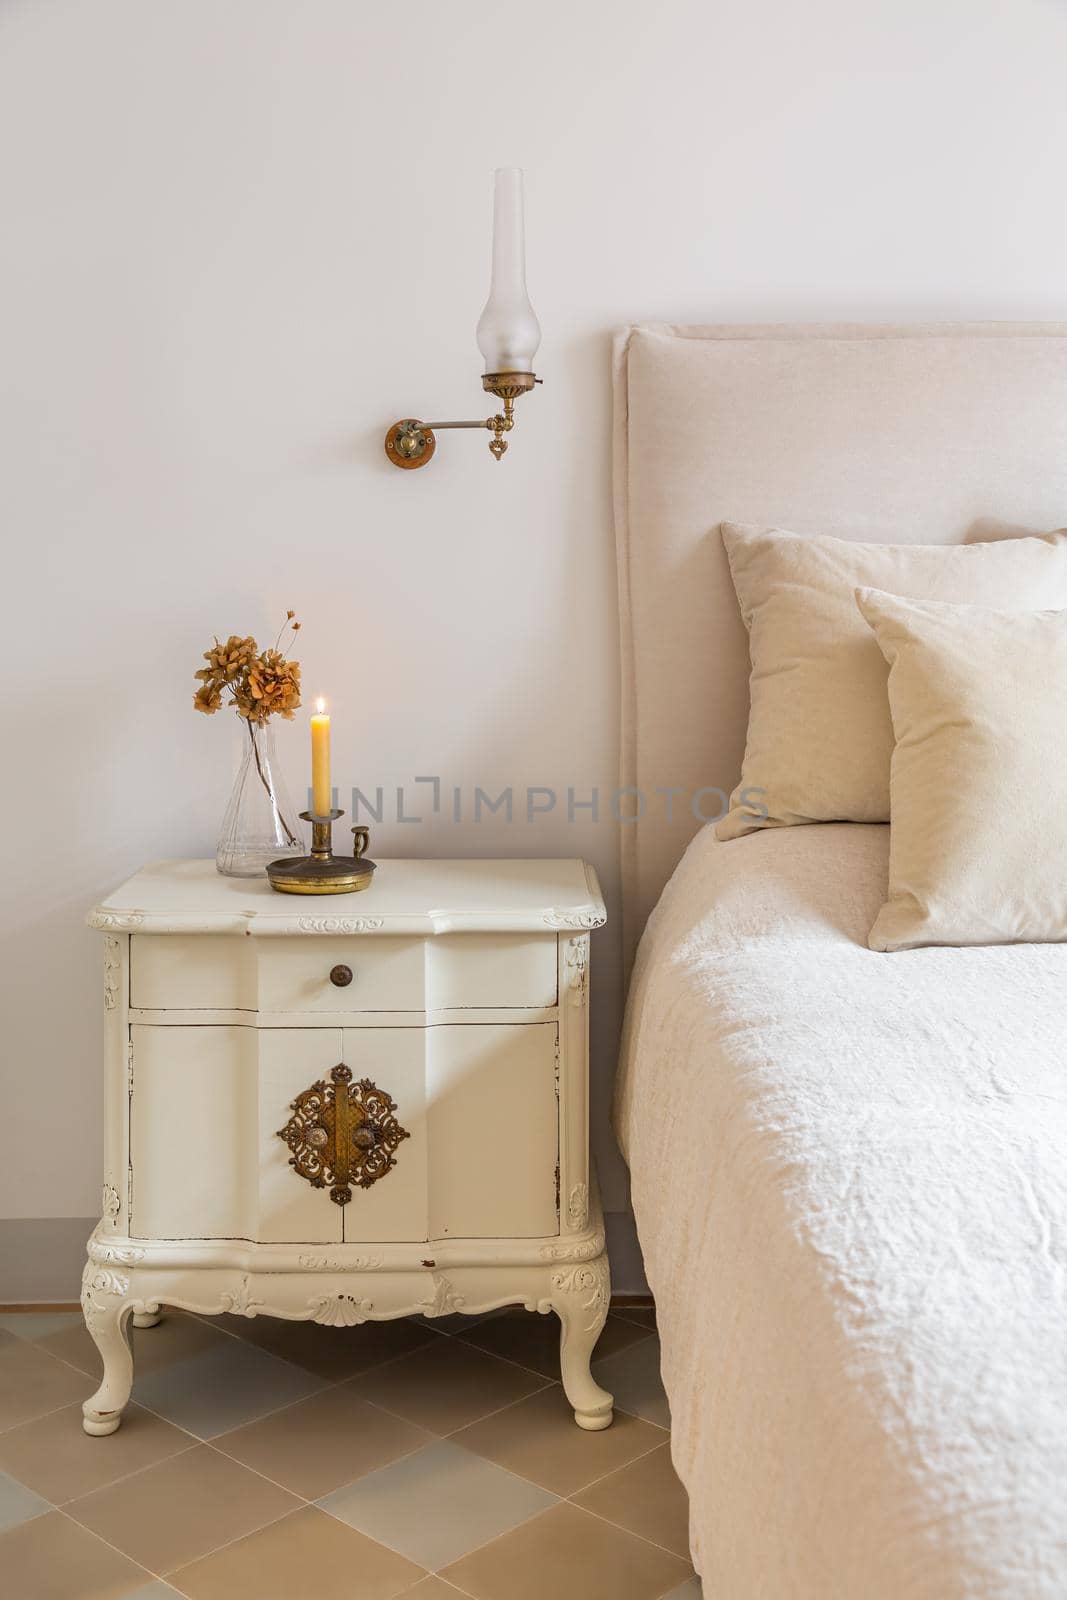 Classic bedroom with wooden bedside table with burning candle and flowers near comfortable bed. Interior of cozy home in retro style